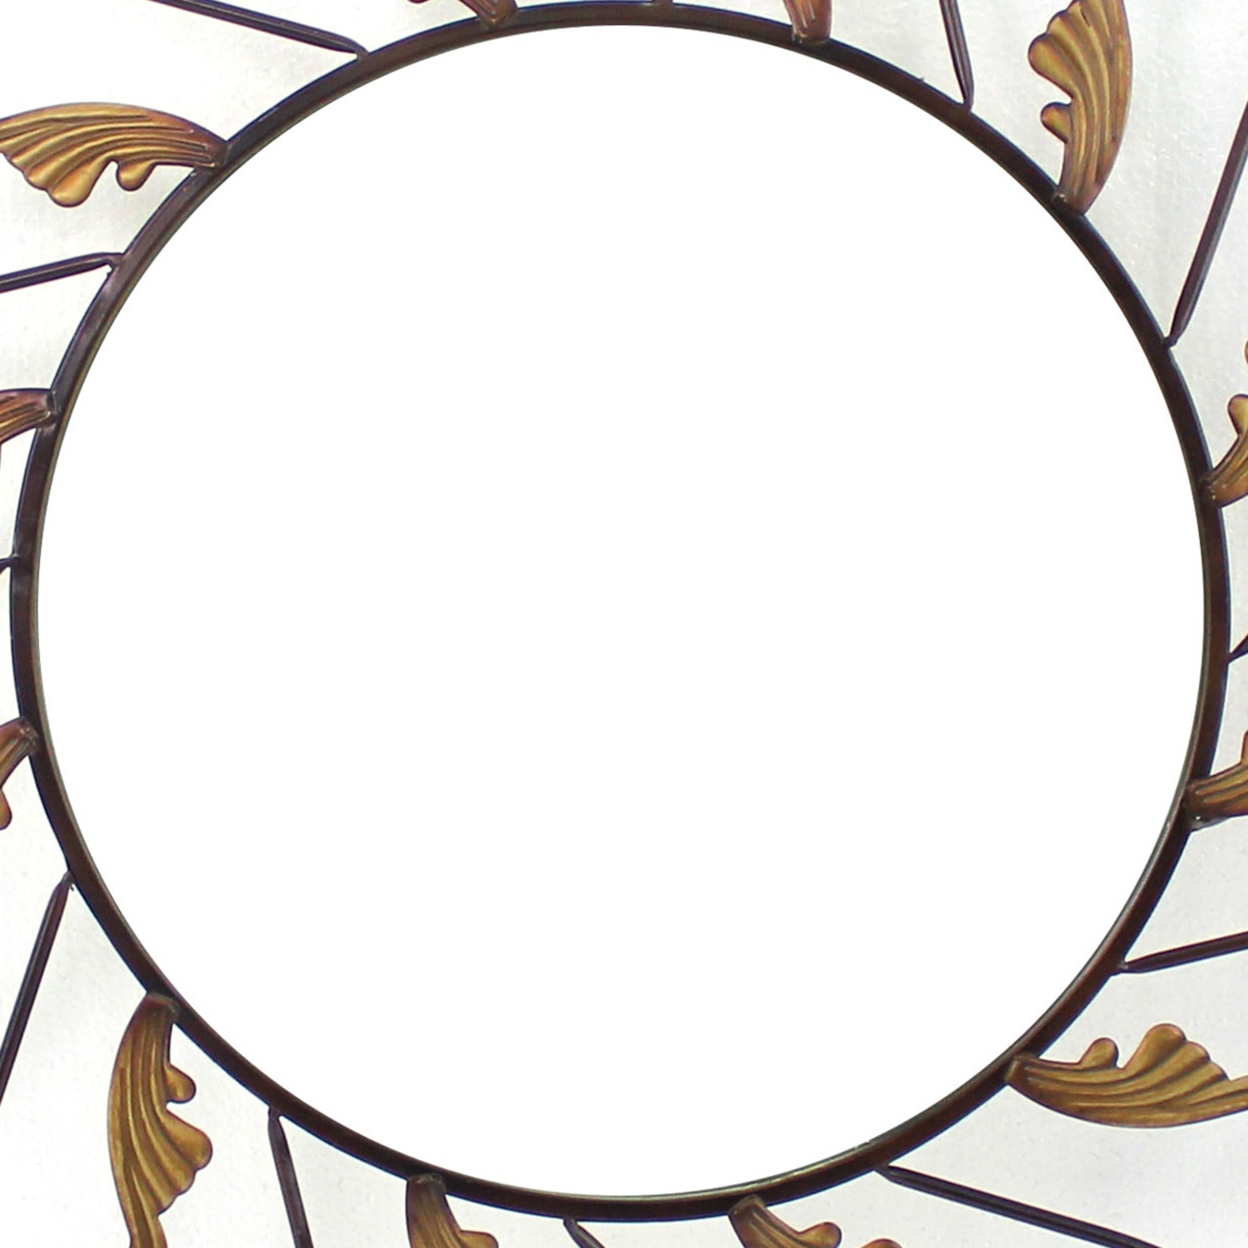 Round Metal Wall Mirror With Scroll Details, Bronze And Gold- Saltoro Sherpi